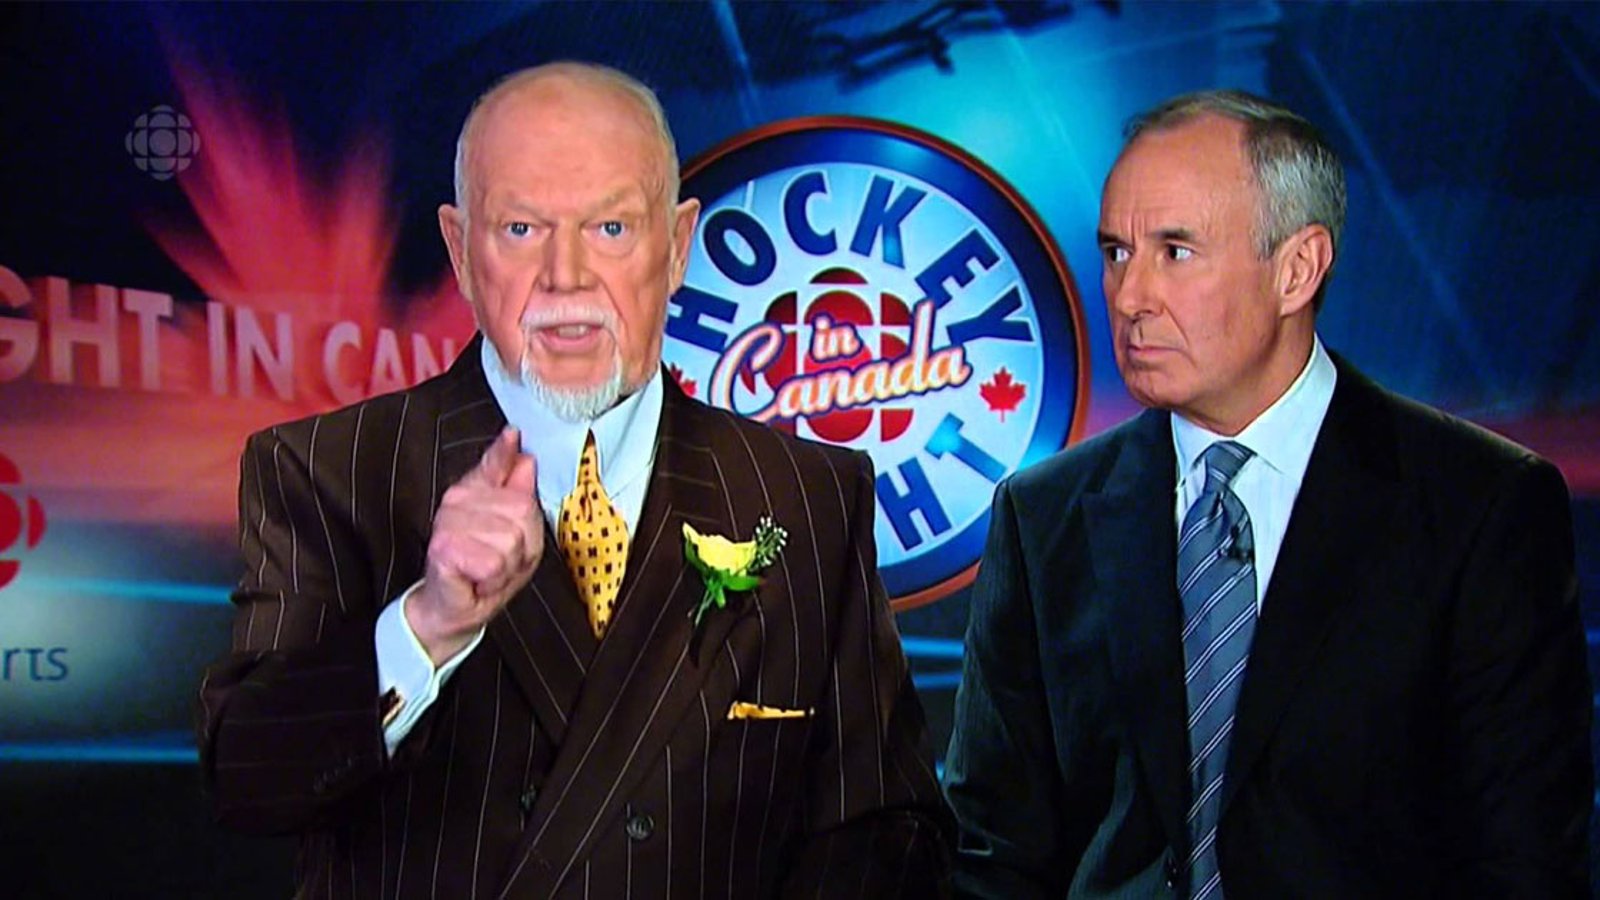 Controversial comments on the NHL and the Olympics made by Don Cherry!